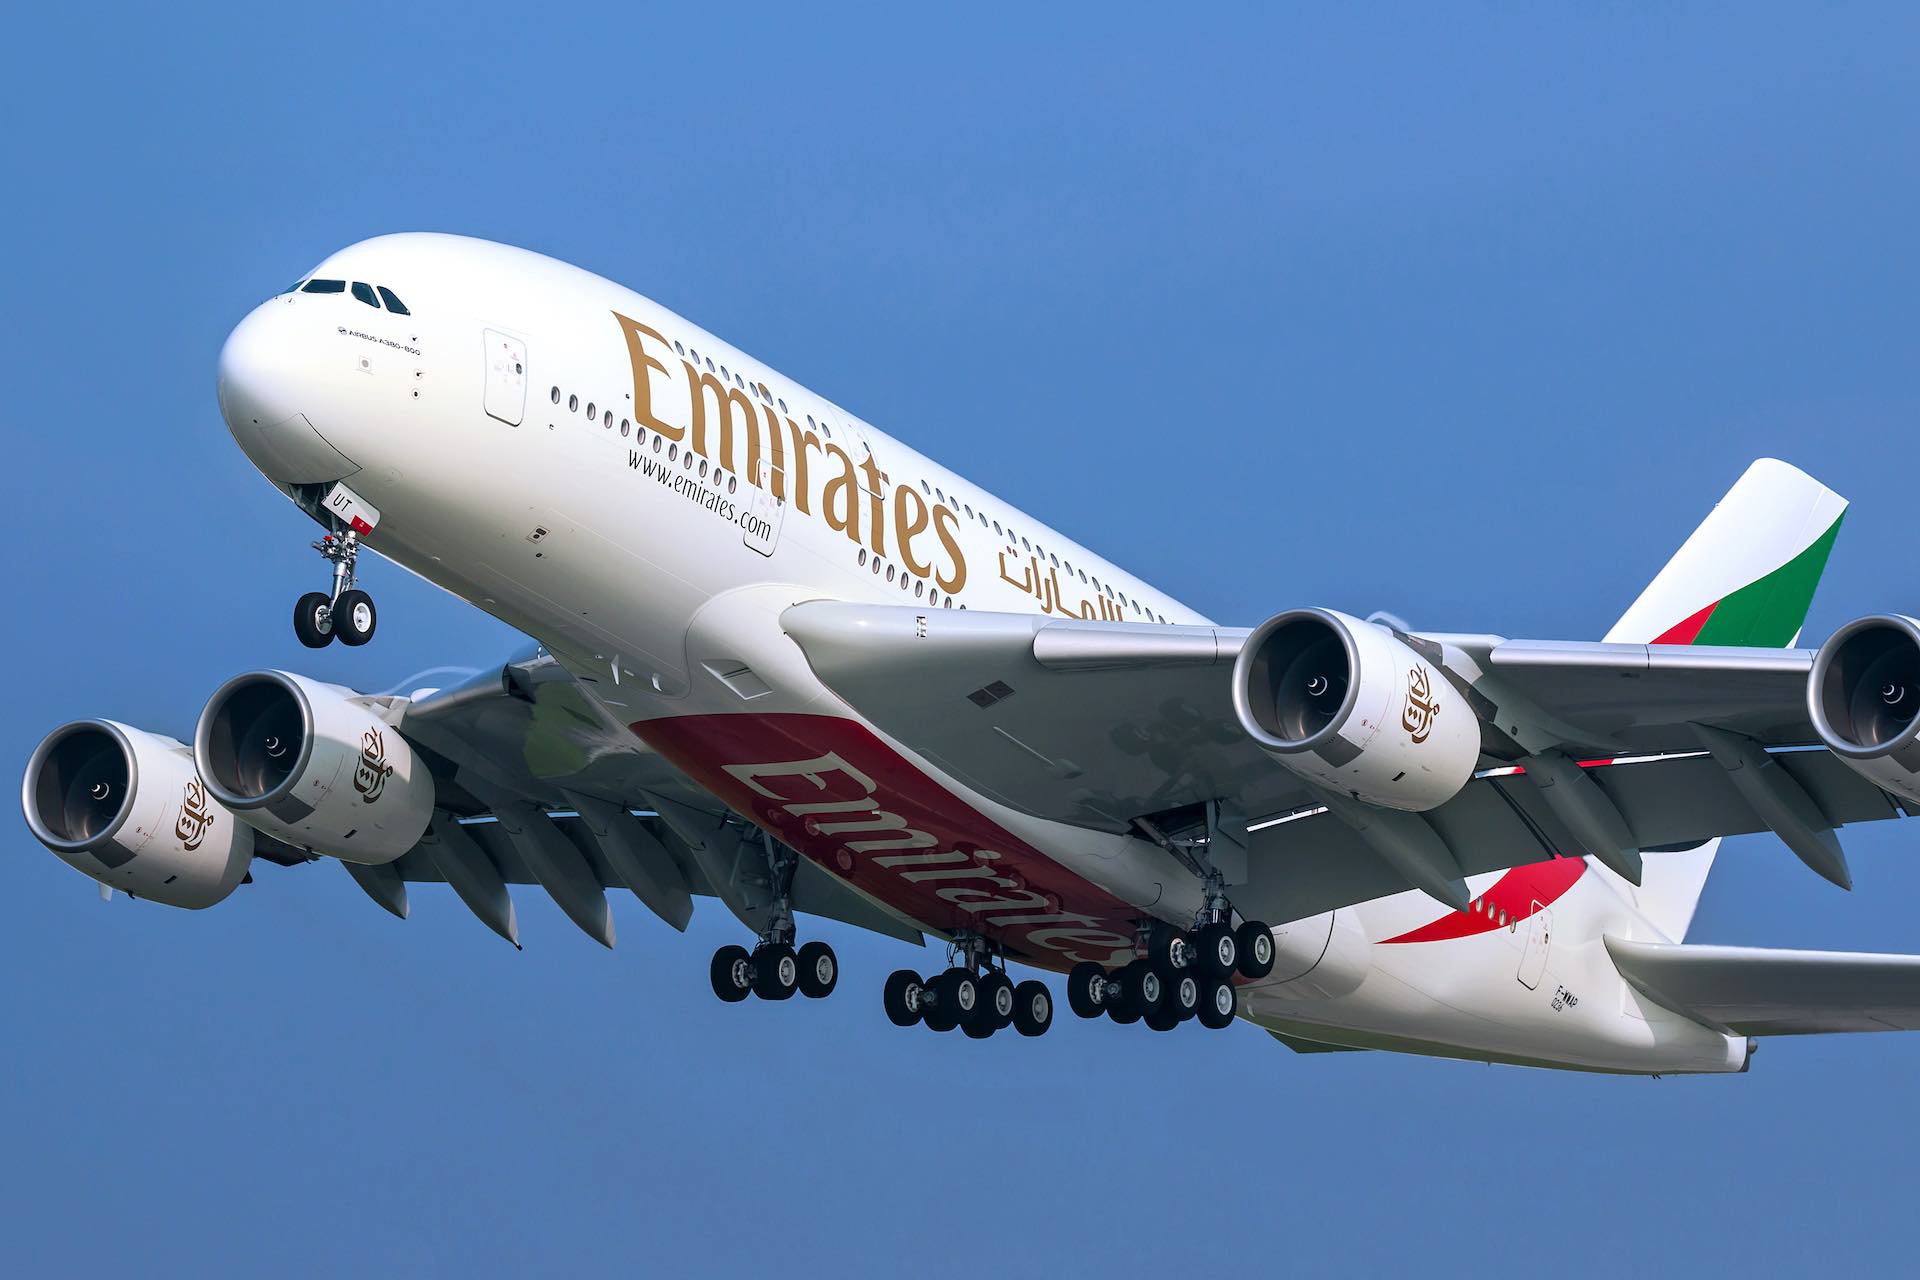 Emirates airline carried over 10 million passengers this summer